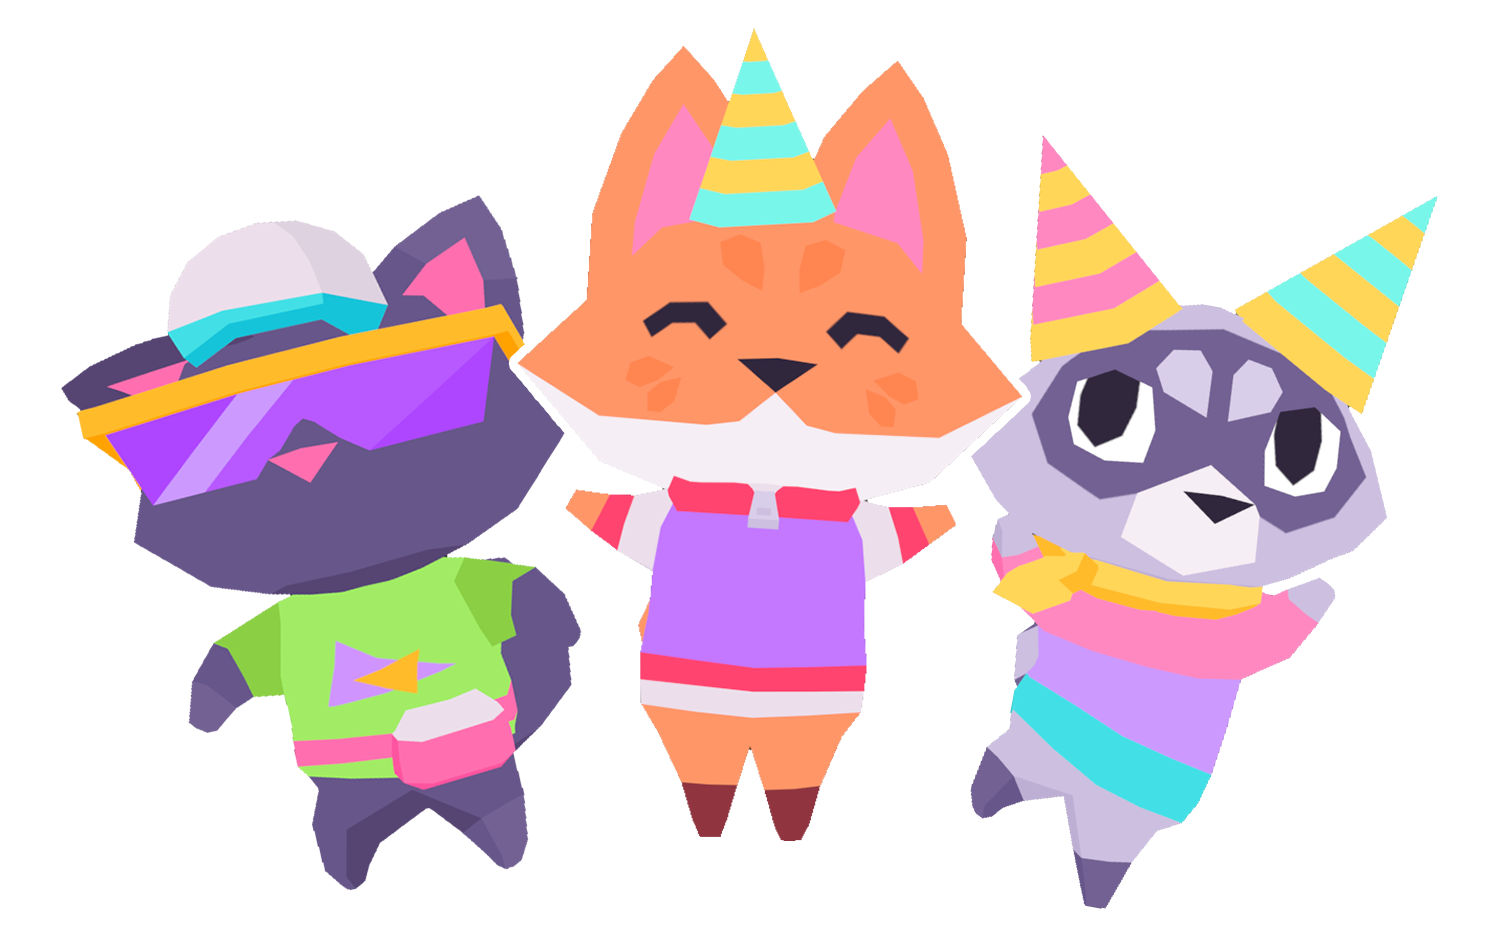 Sorrel, Fennel, and Cilantro wearing party hats